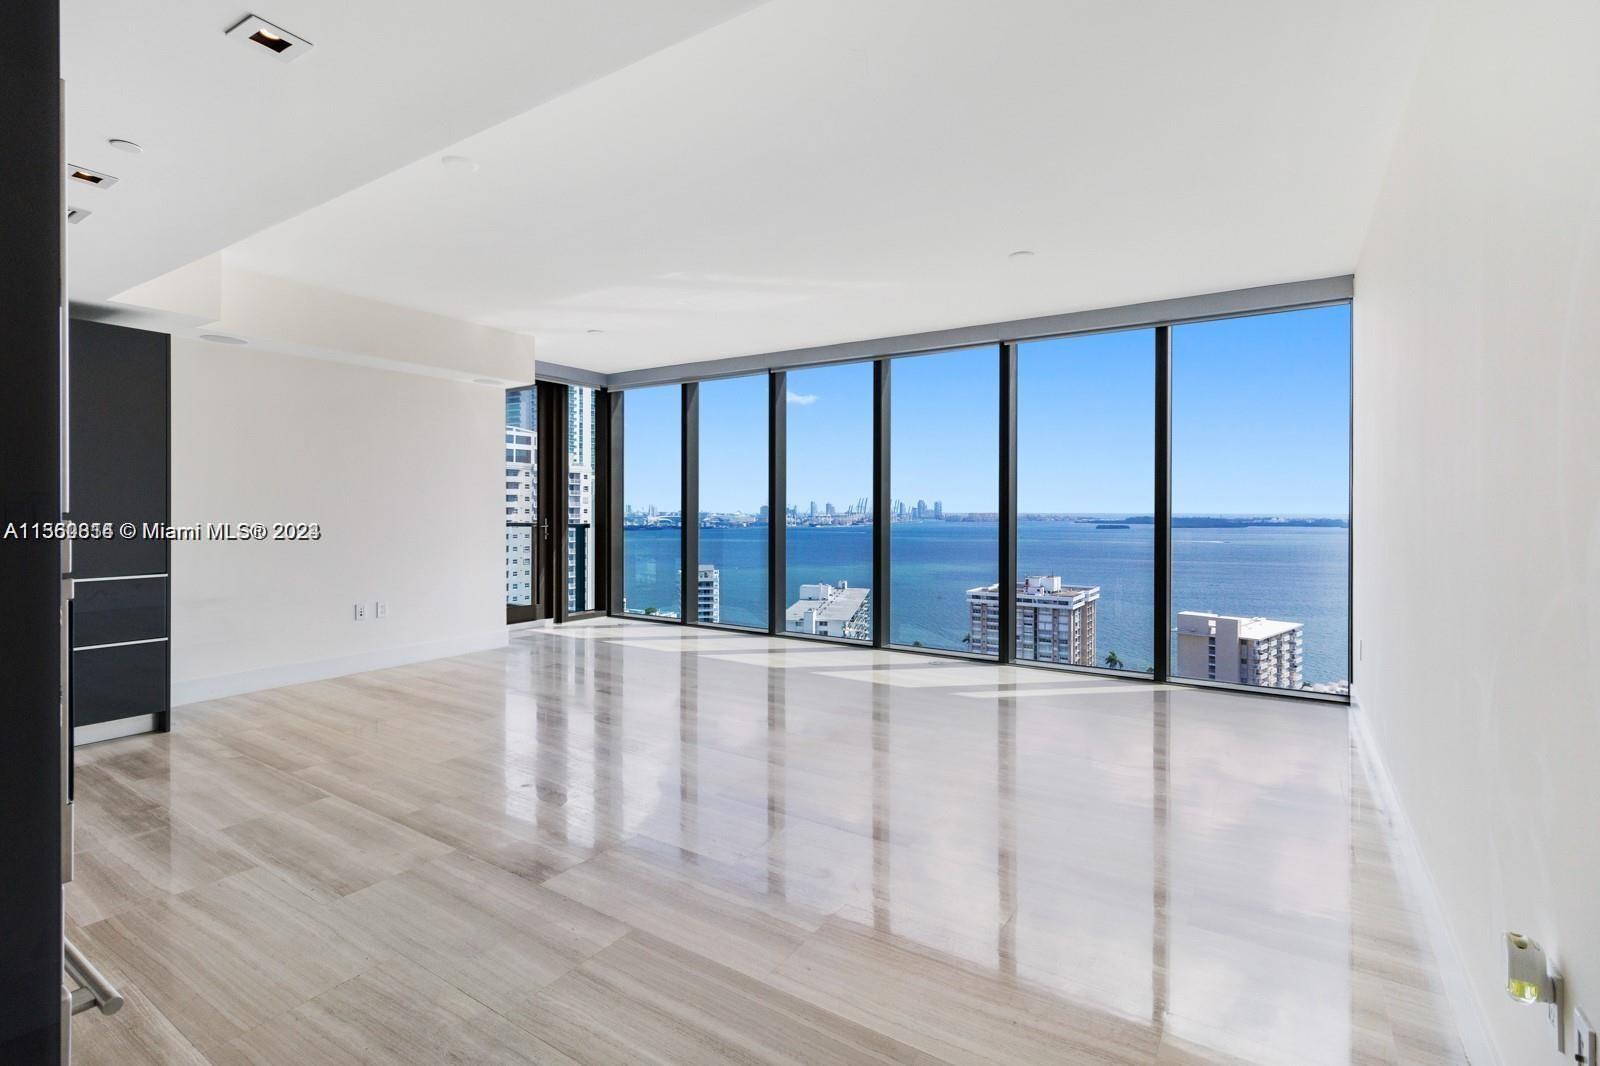 EXQUISITE 2 BEDS / 2.5 BATHS CORNER UNIT AT THE MAGNIFICENT ECHO BRICKELL. HOME SMART TECHNOLOGY. BREATHTAKING BAY AND CITY VIEWS FROM ITS WRAPARROUND BALCONIES WITH AN AMAZING SUMMER KITCHEN PERFECT FOR ENTERTAINING. FLOOR TO-CEILING IMPACT WINDOWS. TOP-OF-THE-LINE WOLF / SUB-ZERO APPLIANCES, INCLUDING A BUILT-IN ESPRESSO MACHINE. 2 PARKING SPACES. ECHO IS ONE OF THE MOST EXCLUSIVE AND PRESTIGIOUS BUILDINGS IN BRICKELL. AMENITIES INCLUDE INFINITY POOL AND DECK SERVING FOOD AND DRINKS, A FULLY EQUIPPED GYM, SPA, 24/7 CONCIERGE, VALET, AND SECURITY. IN HOUSE CHAUFFEUR SERVICES AND ON CALL DOG WALKERS. PERFECT LOCATION, WALKING DISTANCE TO THE BEST RESTAURANTS, COFFEE SHOPS, SUPERMARKET, PHARMACY, THE GLAMOROUS BRICKELL CITY CENTRE AND MUCH MORE.